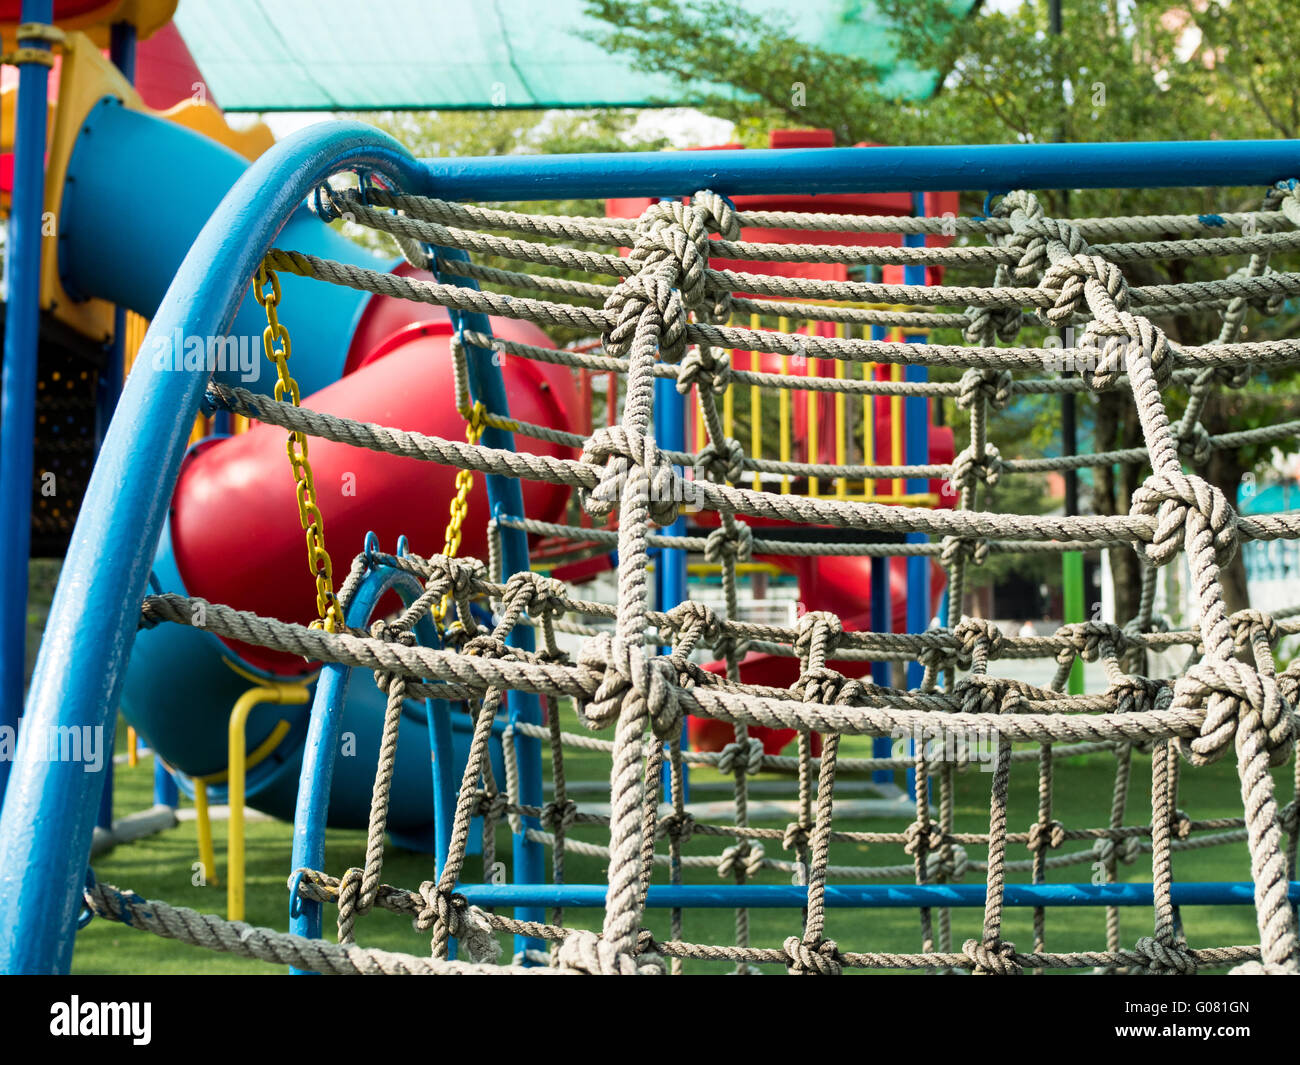 Rope climbing toys for kids in outdoor playground Stock Photo - Alamy